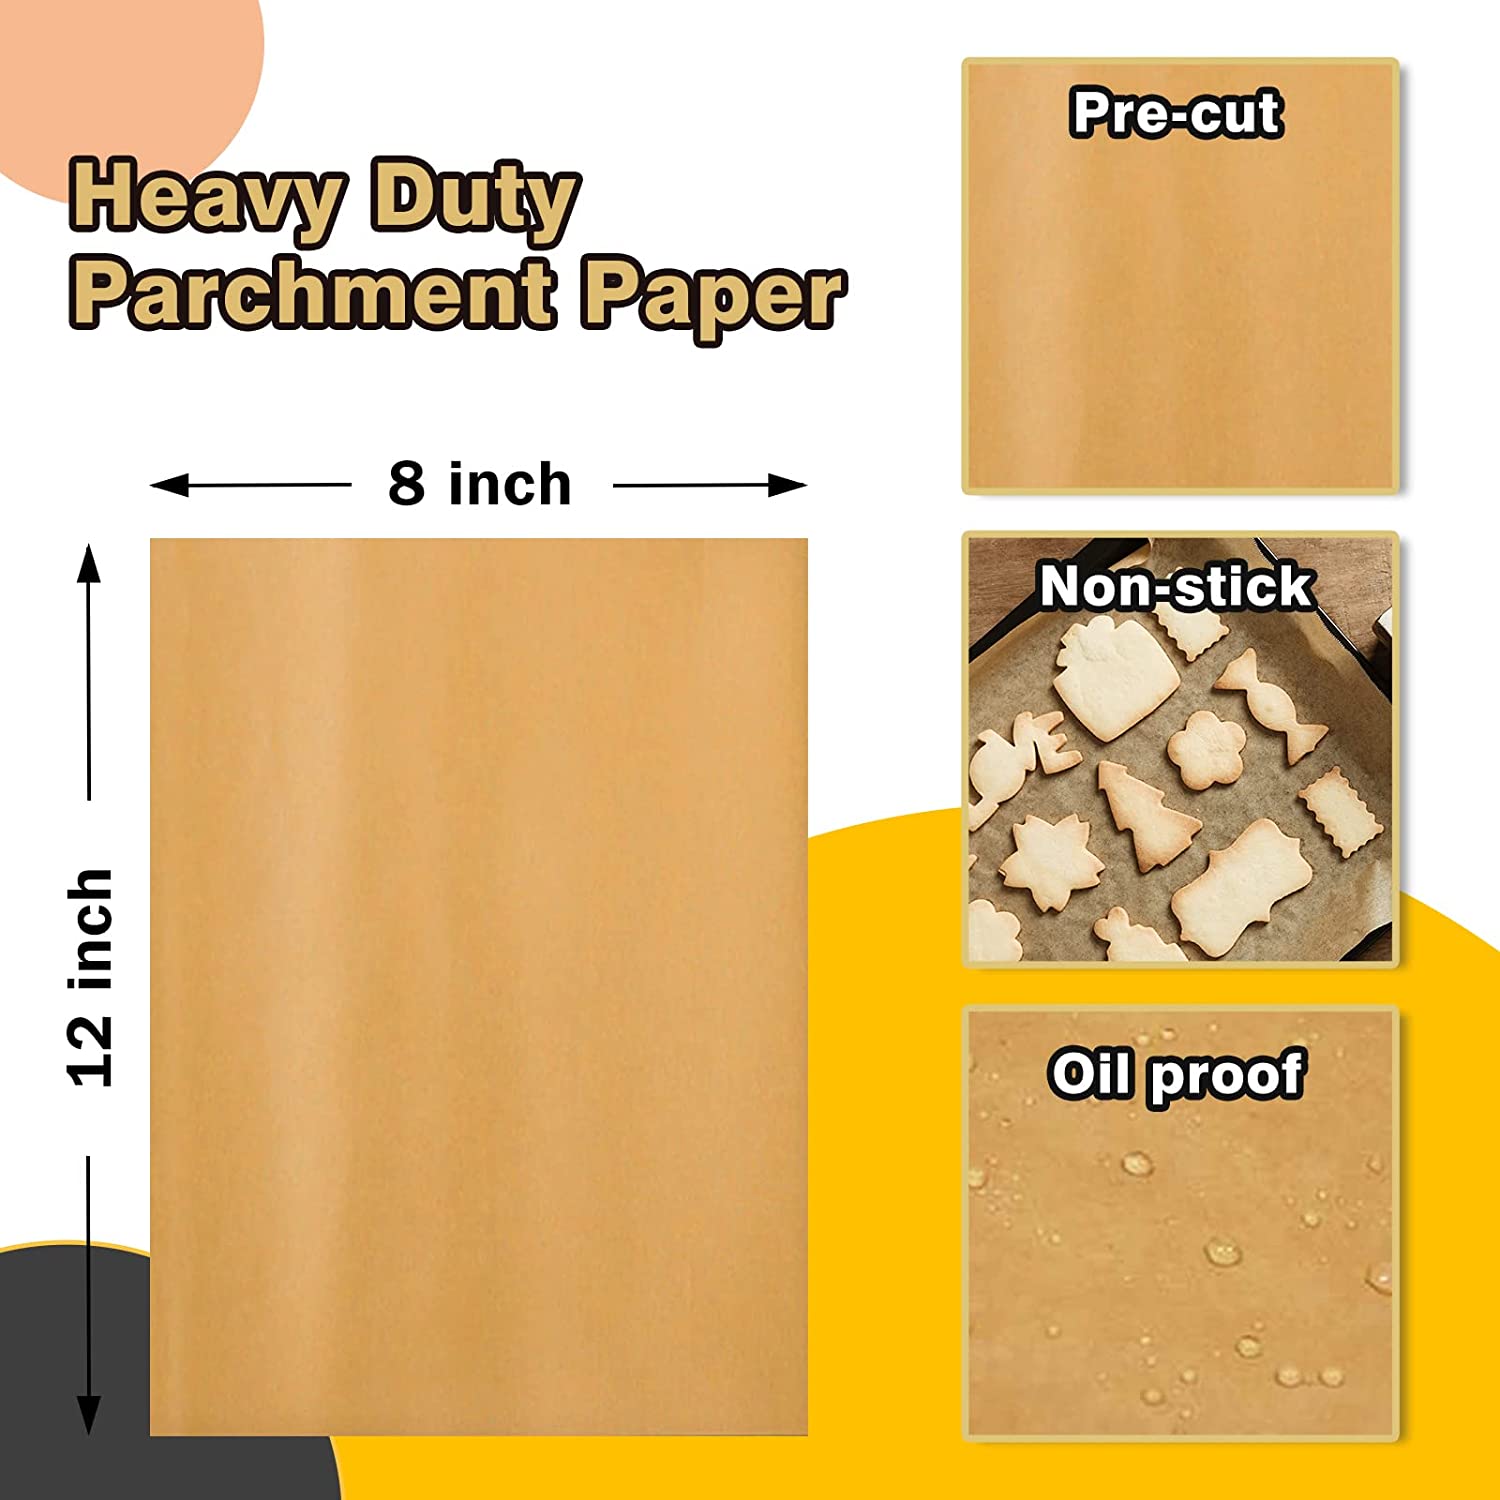 Unbleached Parchment Paper Roll 15 in x 210 ft 260 Sq.Ft Paper